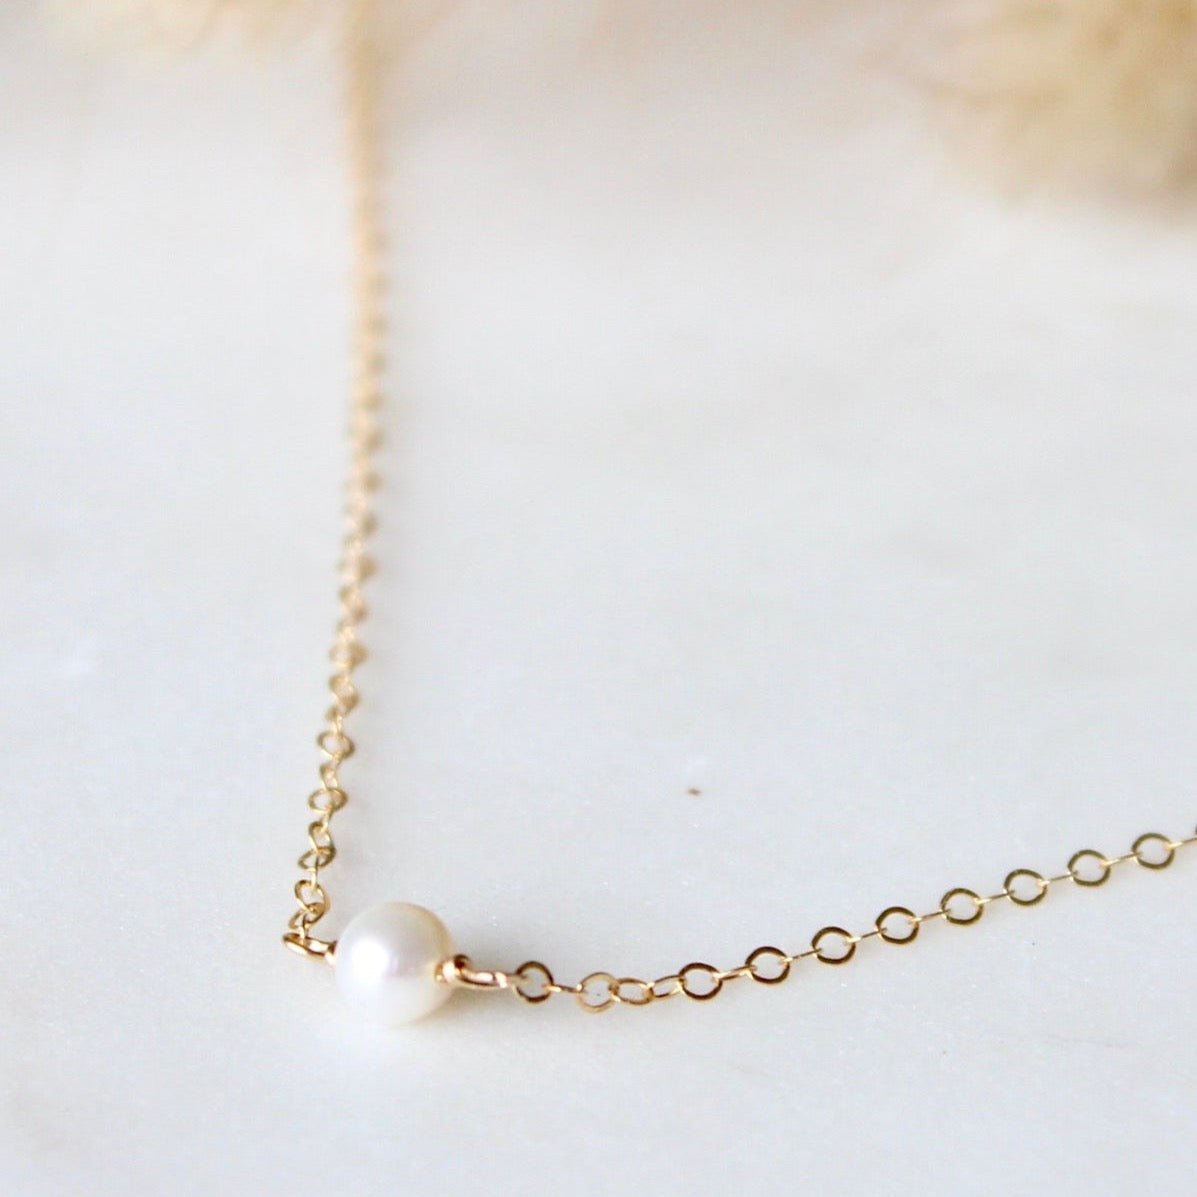 A dainty chain necklace with a tiny freshwater pearl focal piece. The Tiny Freshwater Pearl Necklace is handcrafted by Hello Adorn in Eau Claire, WI.